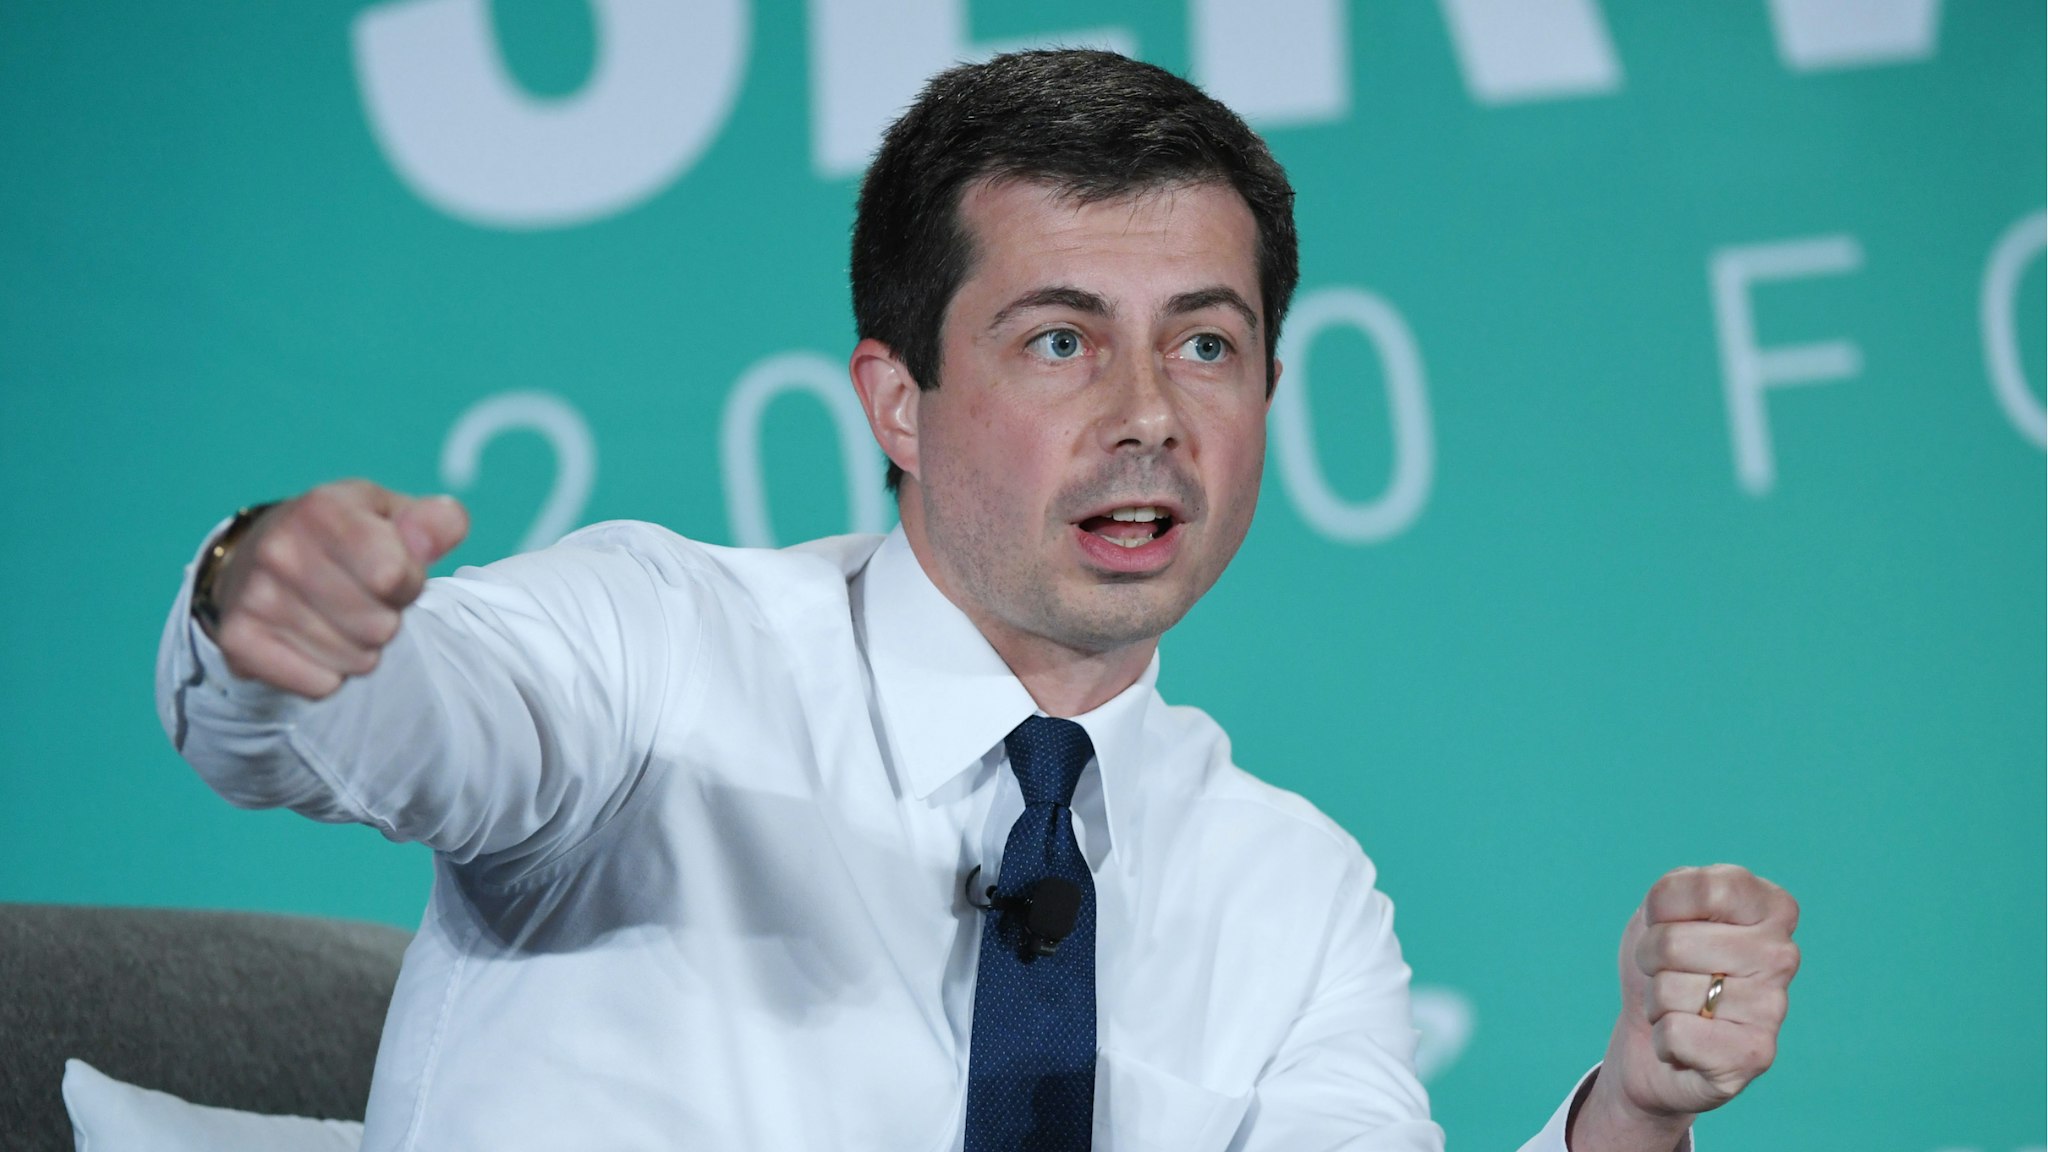 Democratic presidential candidate and South Bend, Indiana Mayor Pete Buttigieg speaks during the 2020 Public Service Forum hosted by the American Federation of State, County and Municipal Employees (AFSCME) at UNLV on August 3, 2019 in Las Vegas, Nevada.